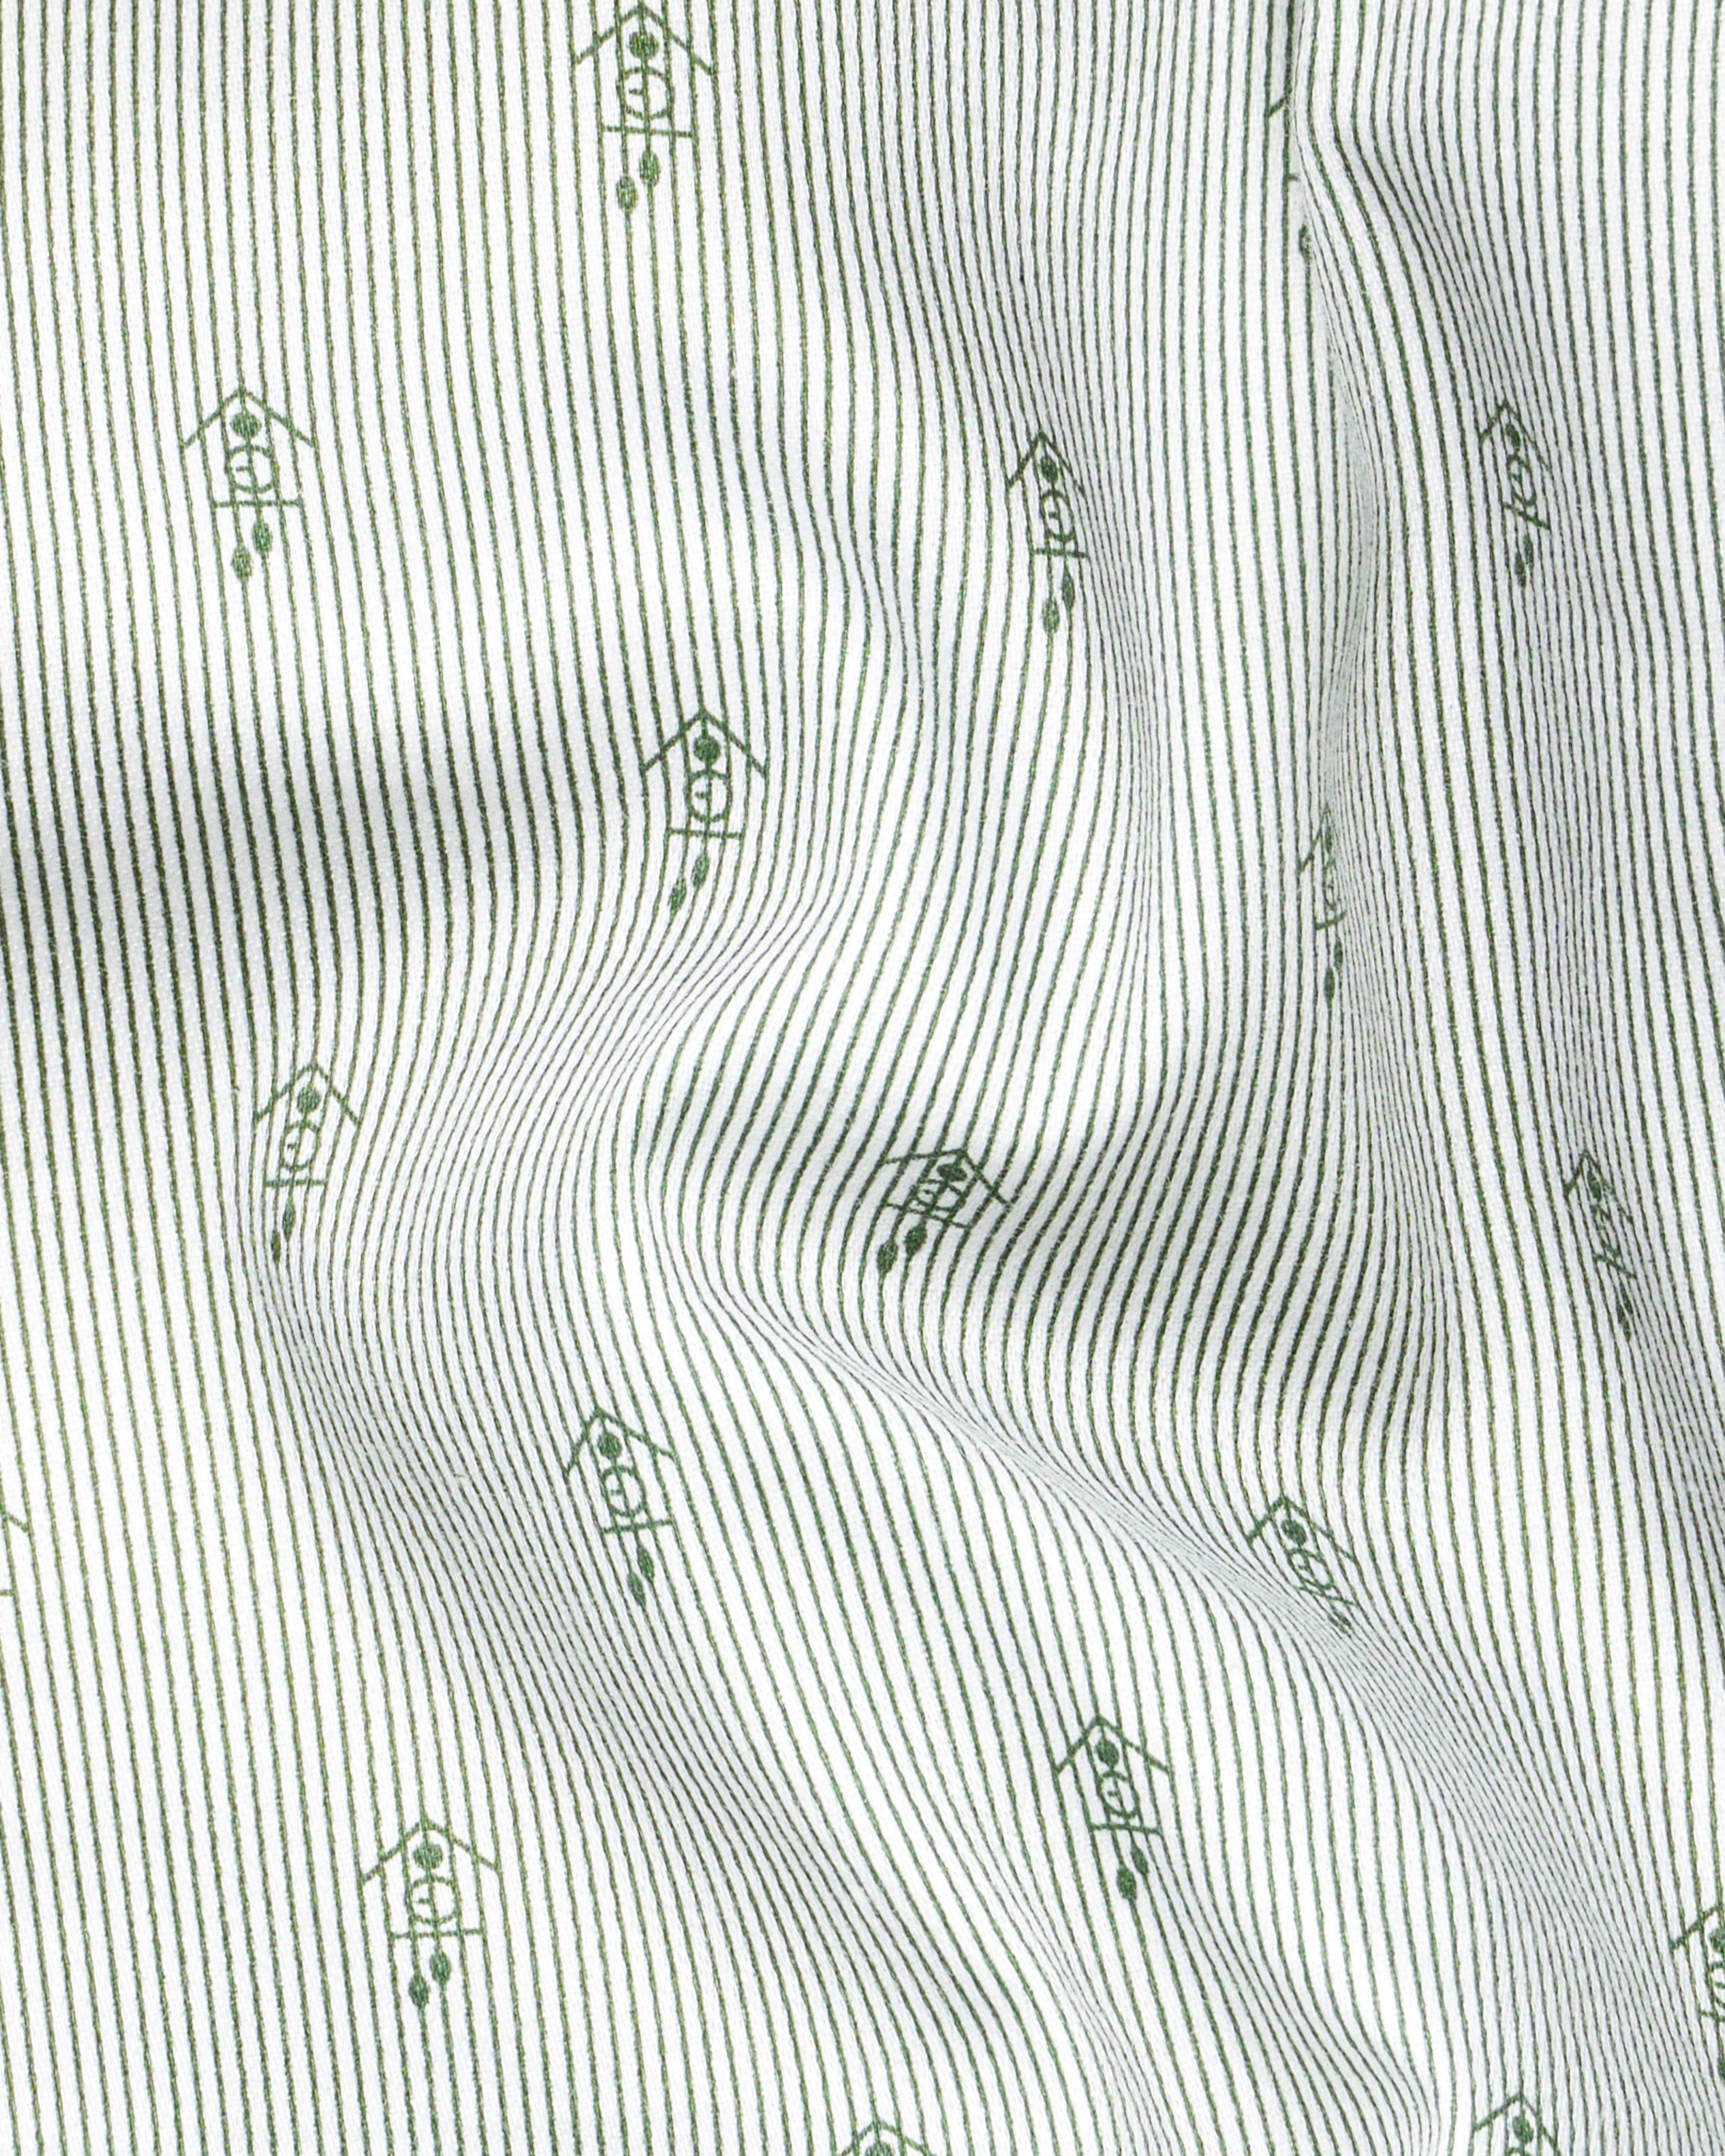 Catskill White with Hemlock Green Pinstriped with Animated Printed Premium Cotton Designer Shirt 7672-GR-RPRT-002-38, 7672-GR-RPRT-002-H-38, 7672-GR-RPRT-002-39, 7672-GR-RPRT-002-H-39, 7672-GR-RPRT-002-40, 7672-GR-RPRT-002-H-40, 7672-GR-RPRT-002-42, 7672-GR-RPRT-002-H-42, 7672-GR-RPRT-002-44, 7672-GR-RPRT-002-H-44, 7672-GR-RPRT-002-46, 7672-GR-RPRT-002-H-46, 7672-GR-RPRT-002-48, 7672-GR-RPRT-002-H-48, 7672-GR-RPRT-002-50, 7672-GR-RPRT-002-H-50, 7672-GR-RPRT-002-52, 7672-GR-RPRT-002-H-